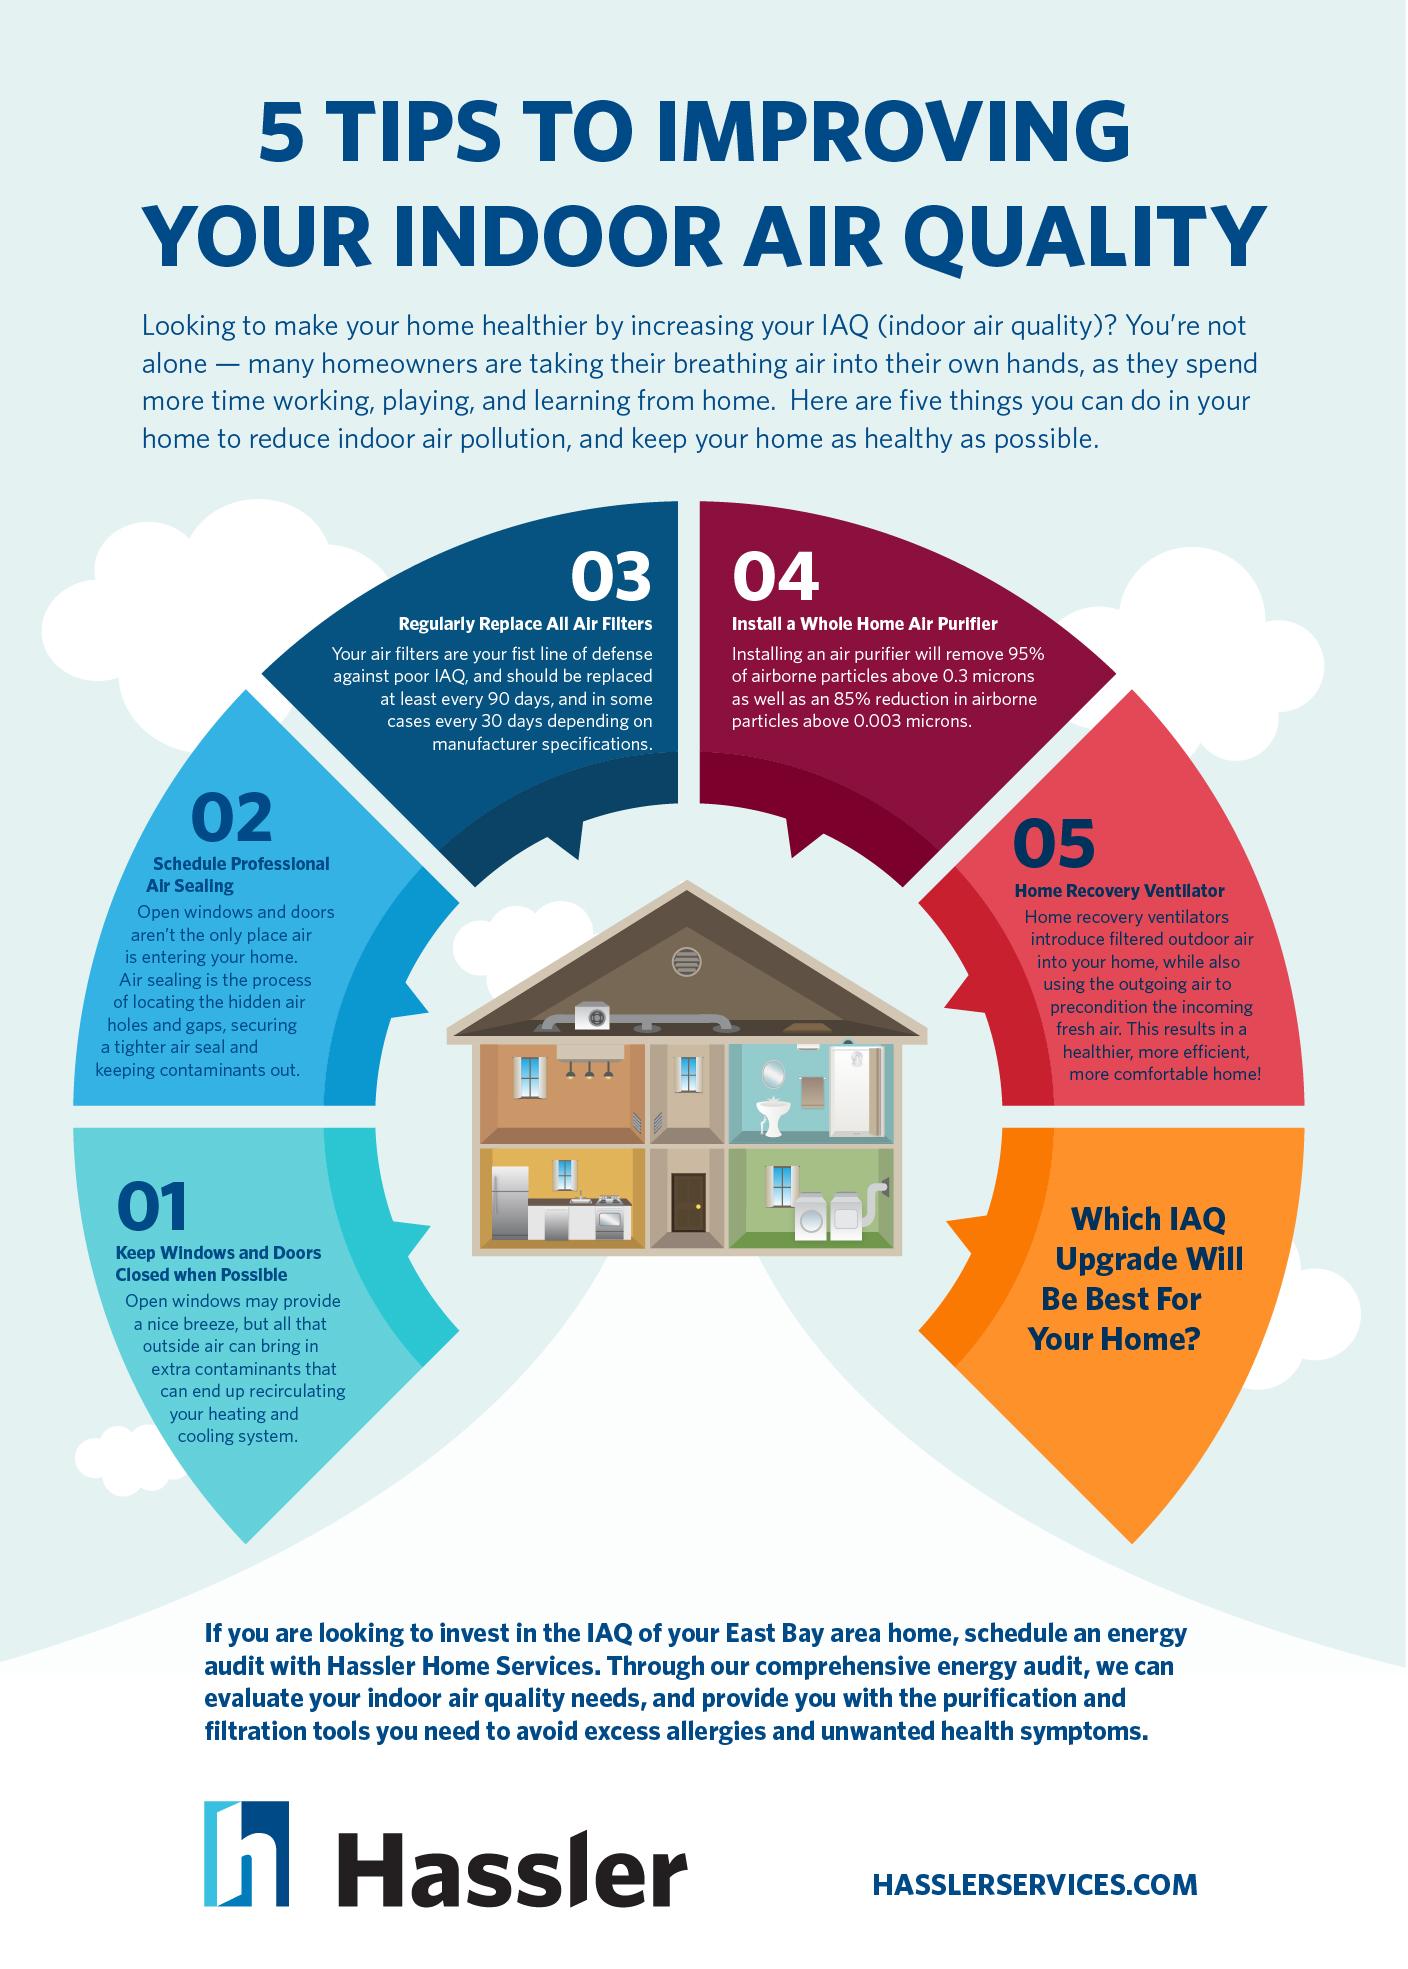 Breathe Easy: Effective Strategies to Improve Indoor Air Quality